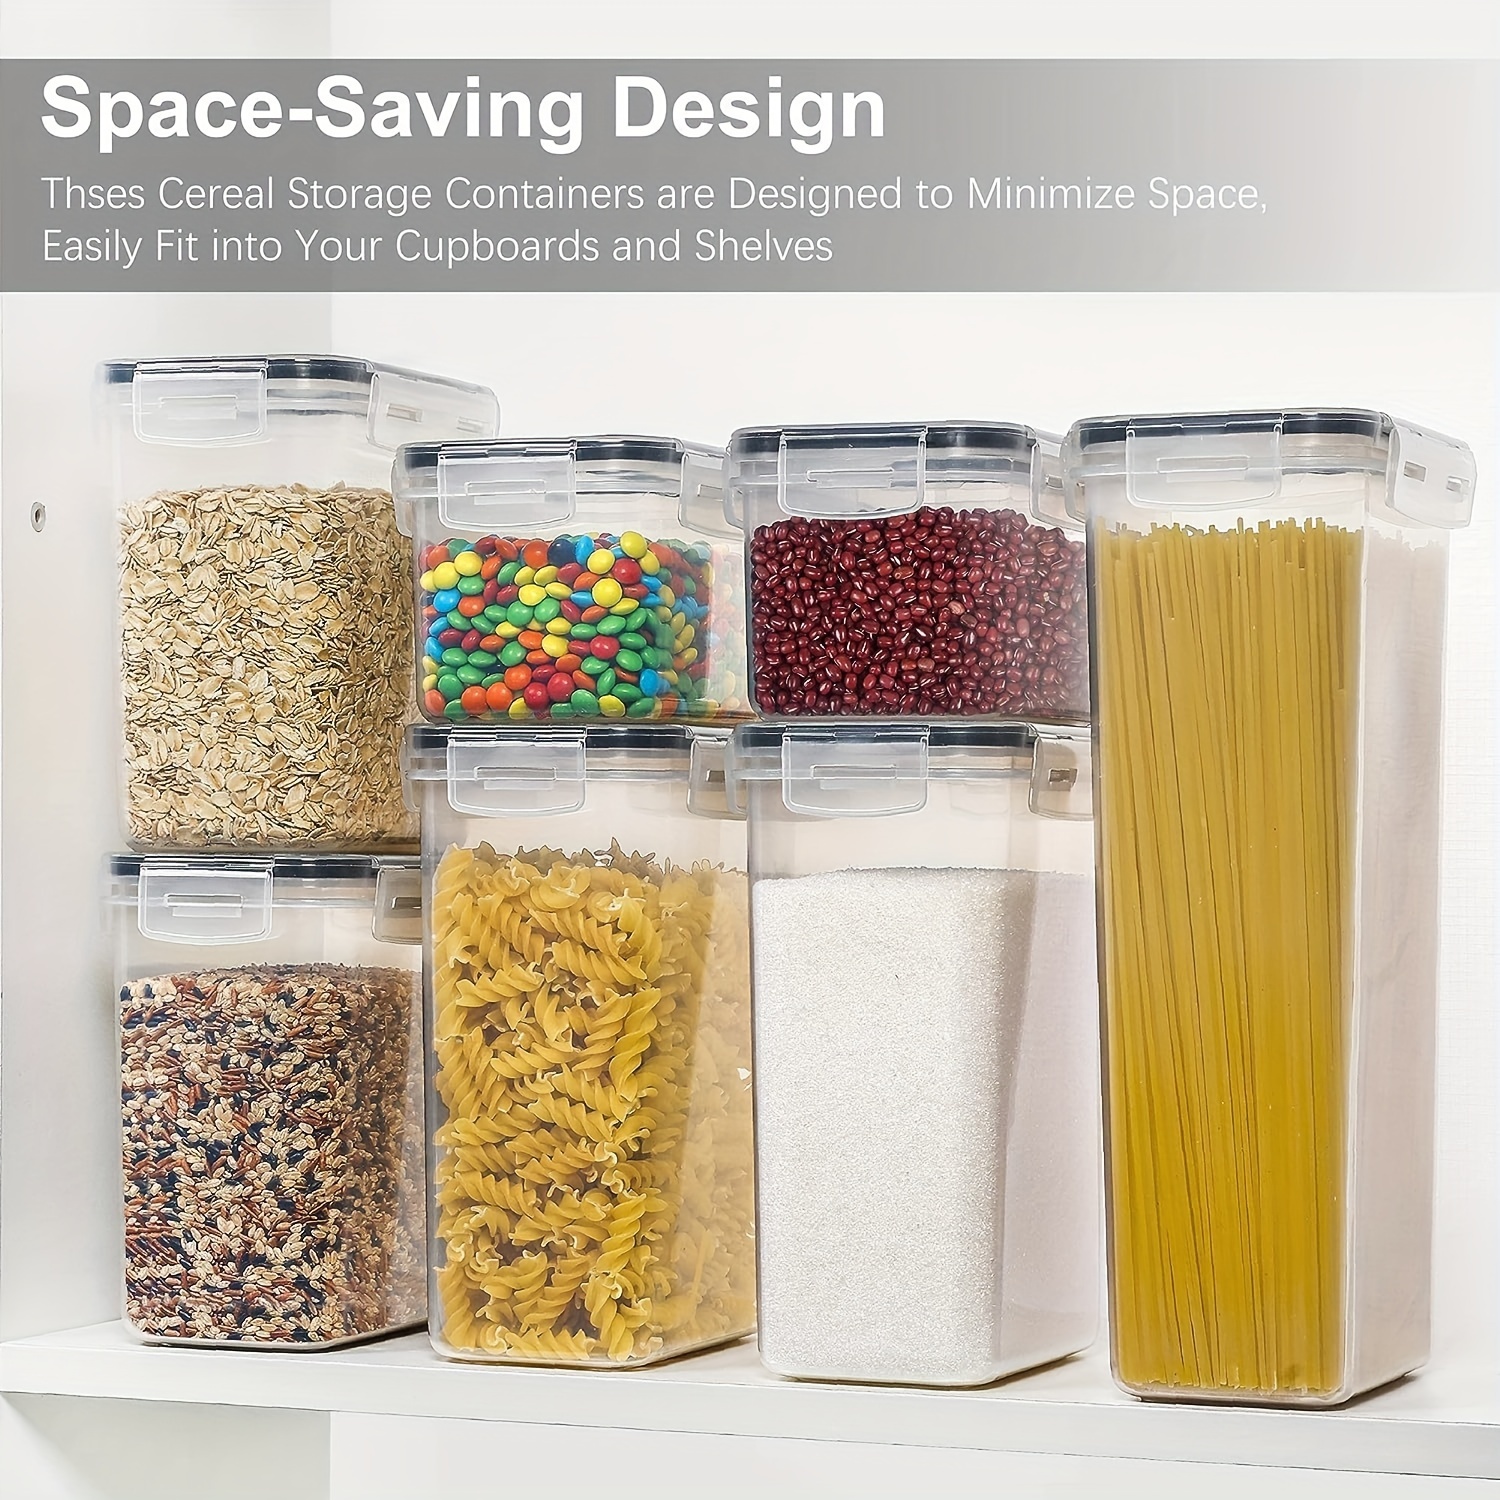 11pcs Airtight Food Storage Containers With Lids - Perfect For